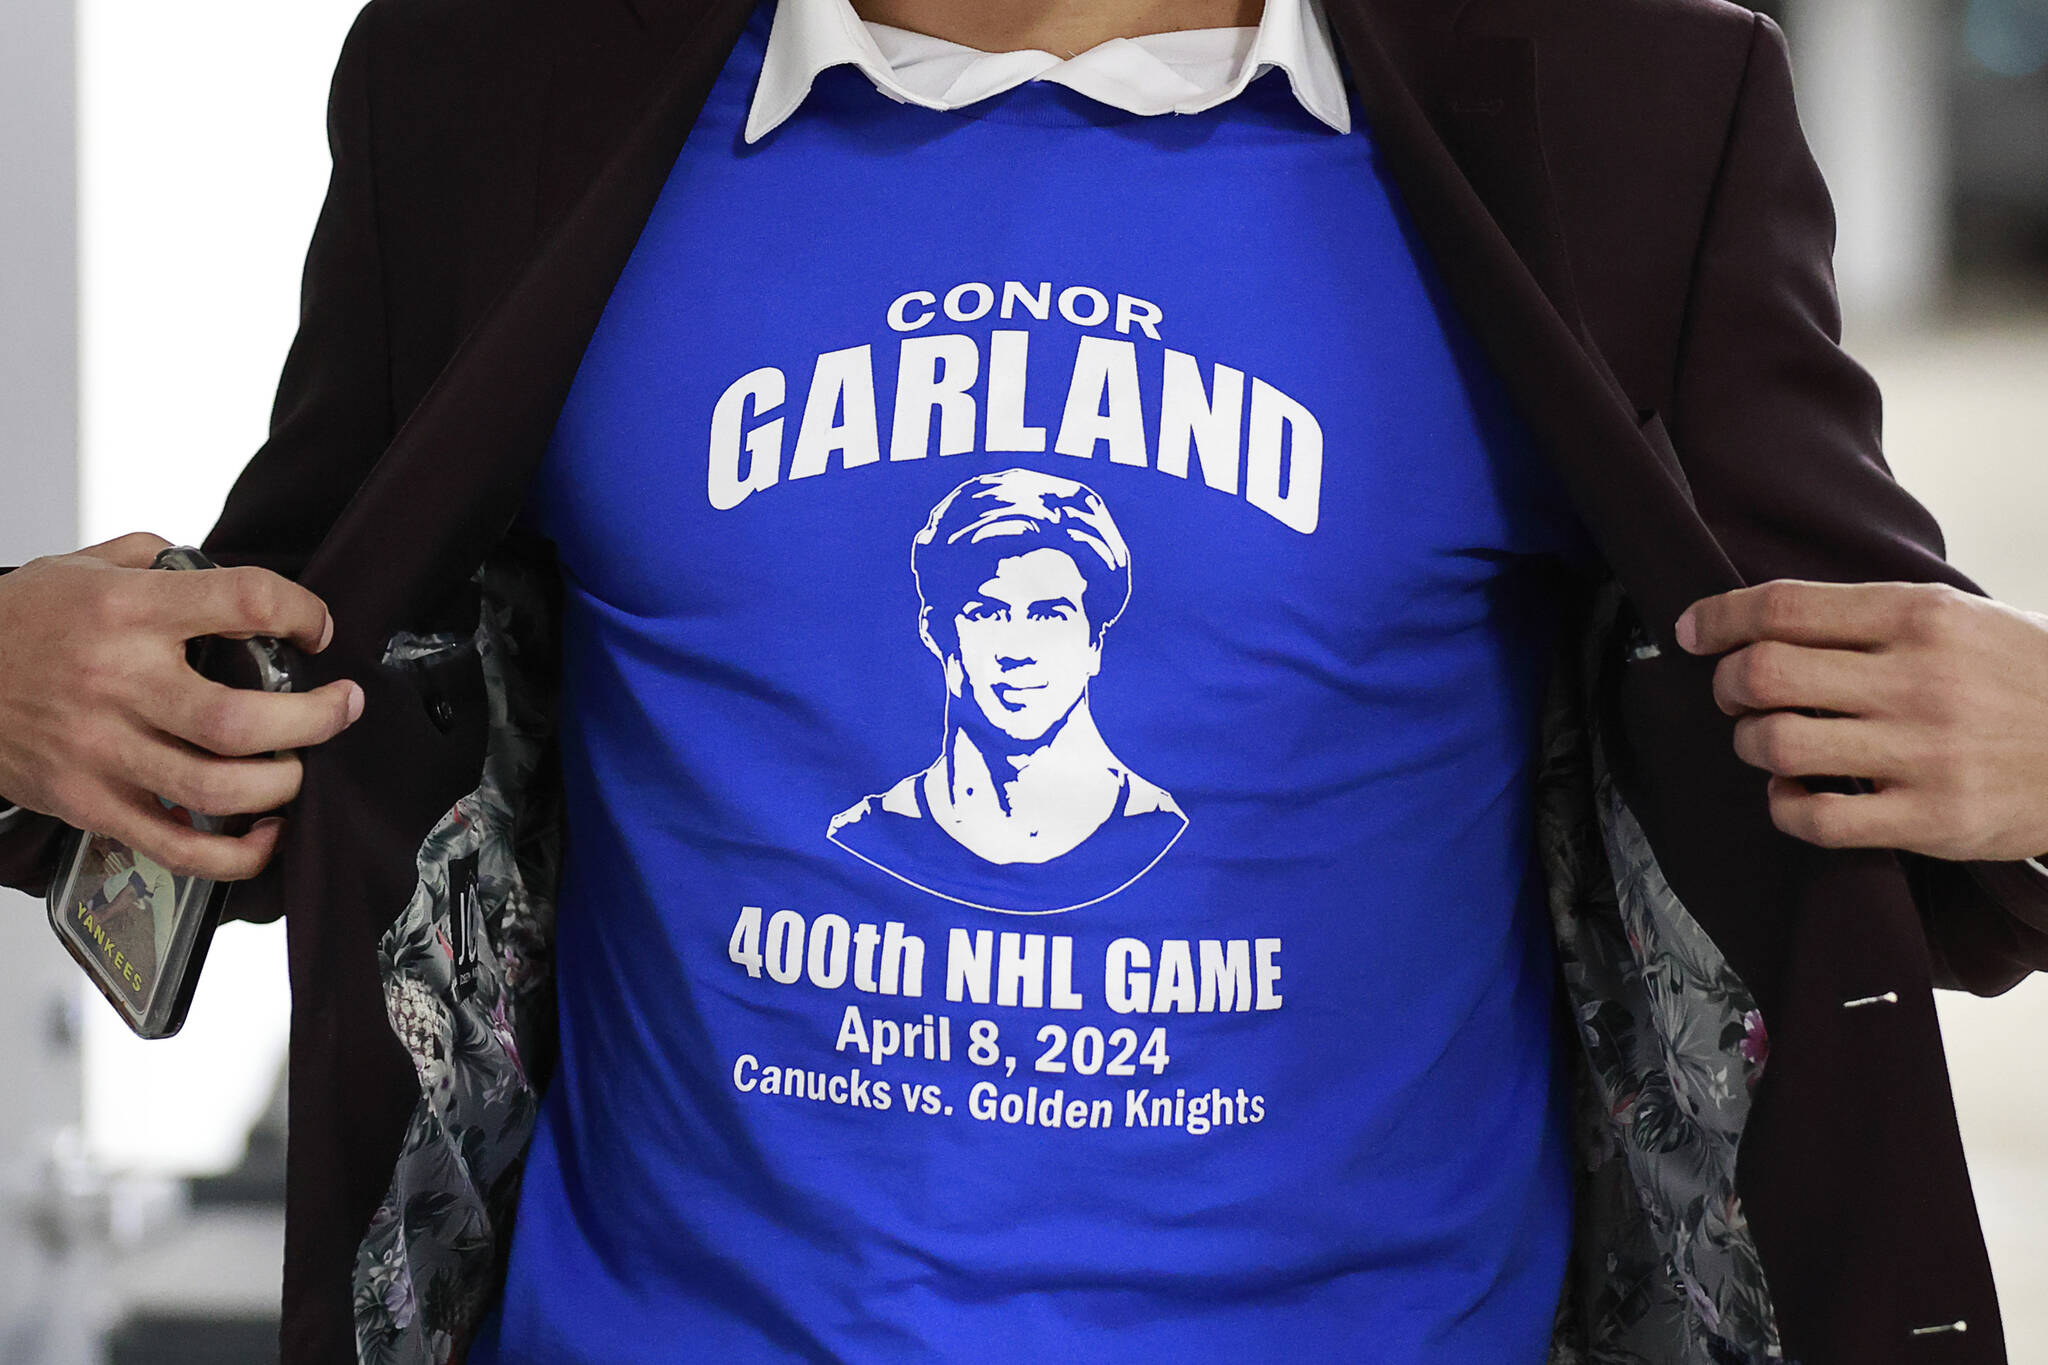 Vancouver’s Dakota Joshua arrives at Rogers Arena wearing a t-shirt comemarting Conor Garland’s 400th NHL game. Garland would score twice in the Canucks 4-3 win against the Vegas Golden Knights Monday night at Rogers Arena. Vancouver Canucks photo